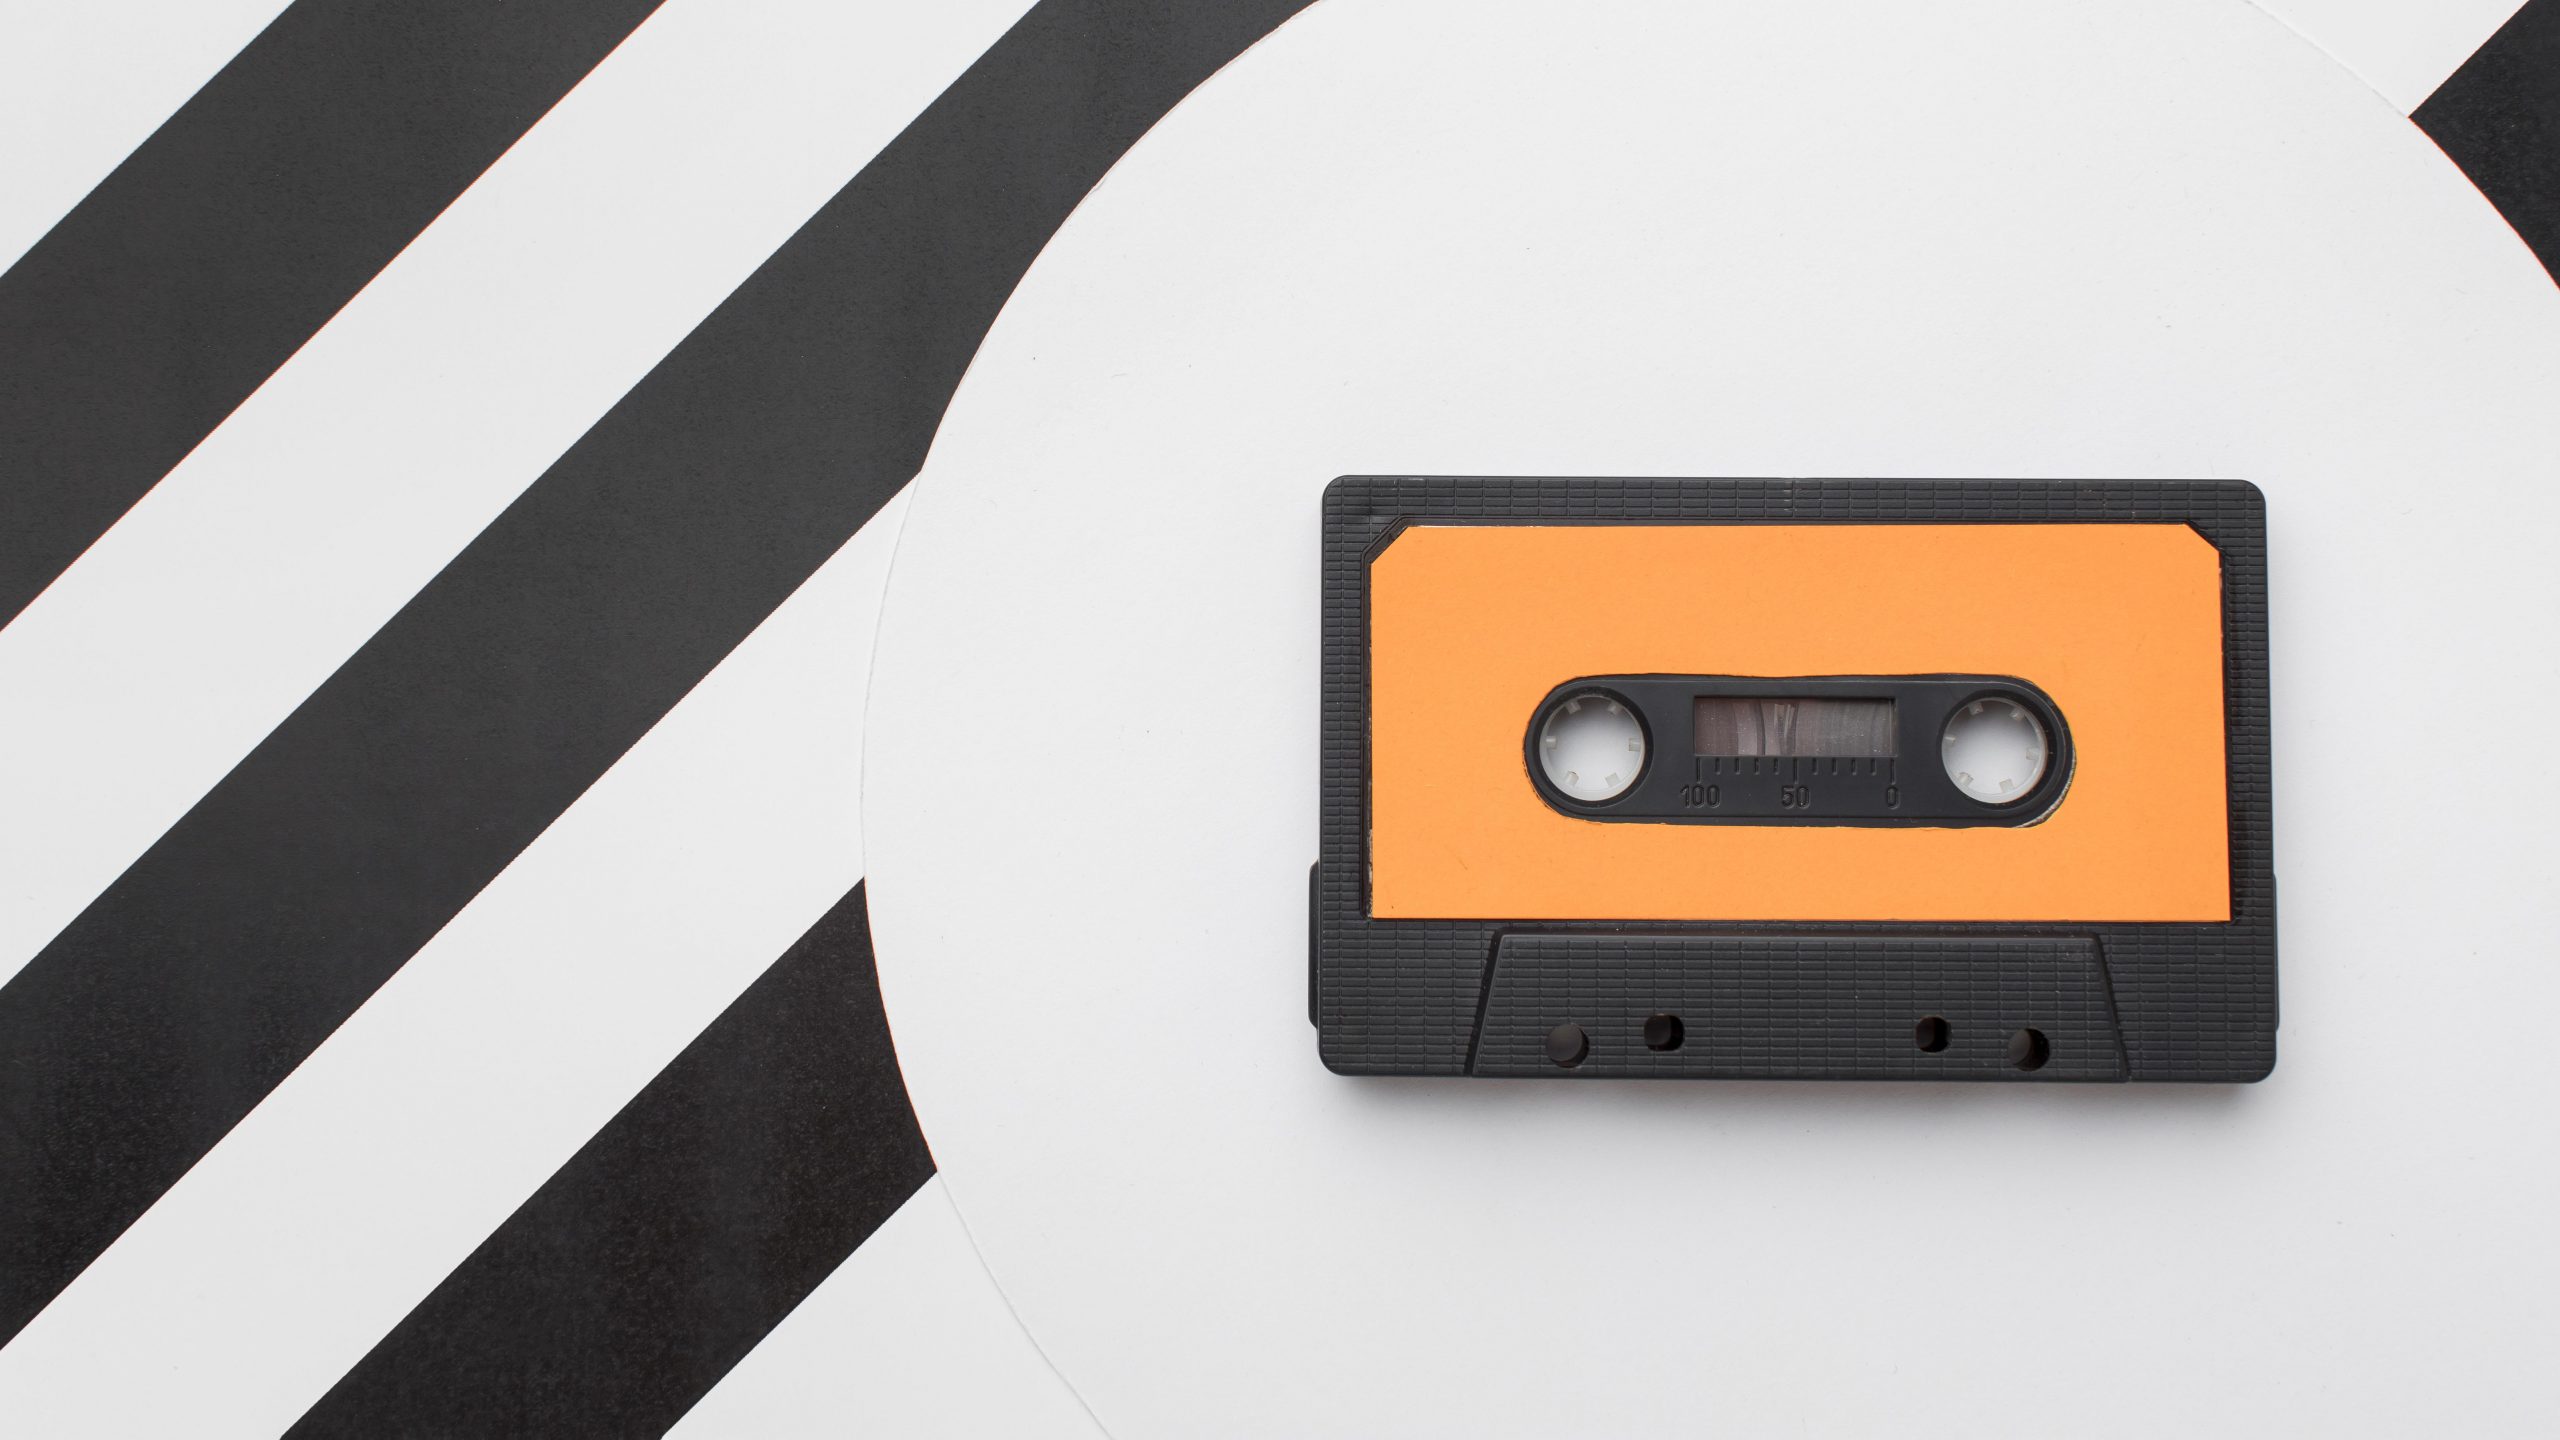 Vintage cassette tape on a modern background as main photo for a blog post with story of a cassette tape